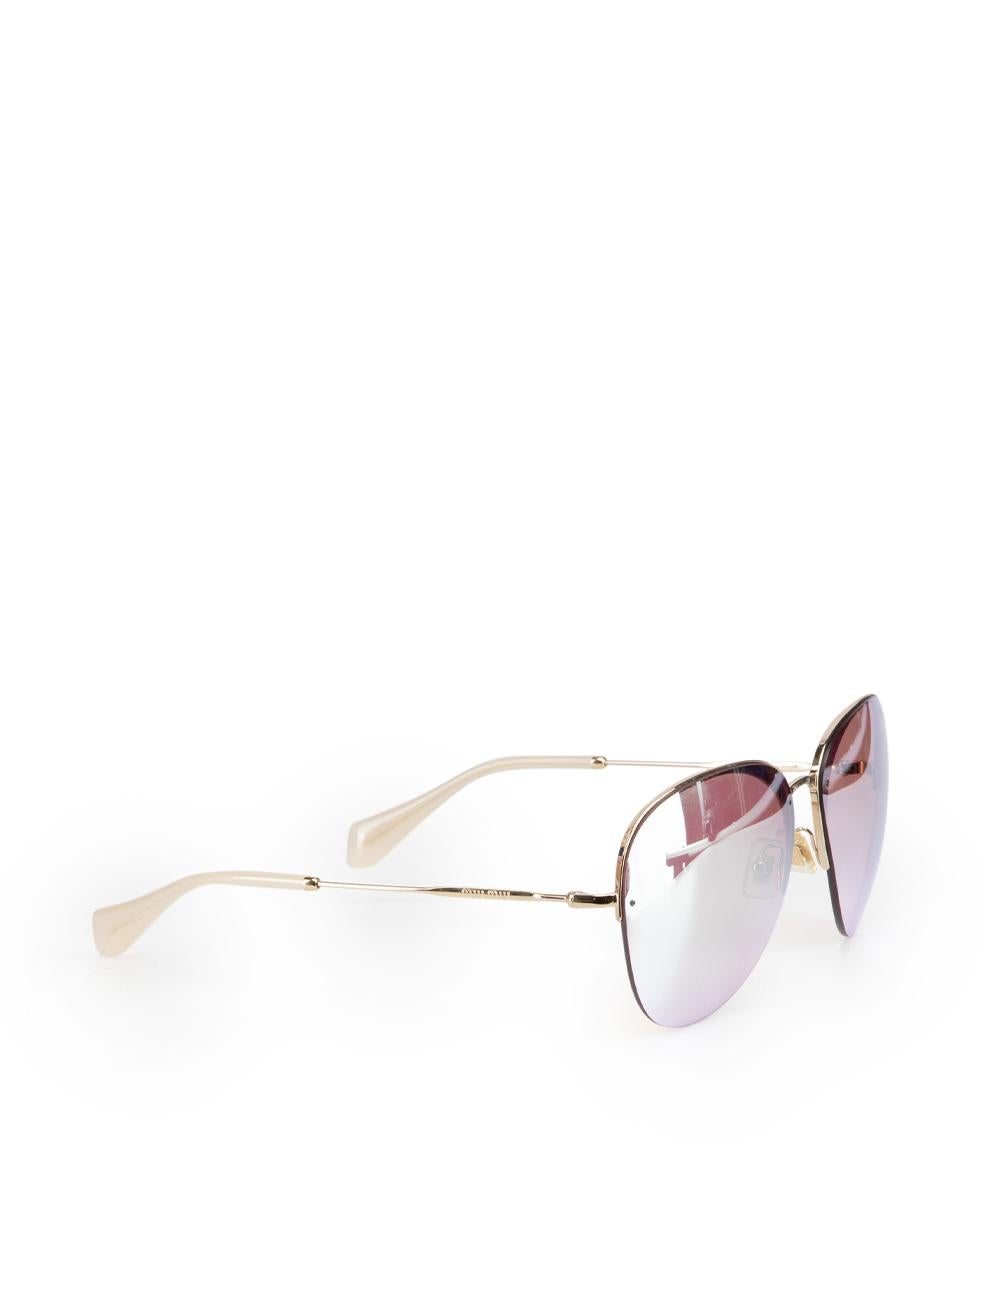 CONDITION is Very good. Minimal wear to sunglasses is evident. Minimal wear to the left-side frame with small indent to the metal on this used Miu Miu designer resale item. These sunglasses come with original case and